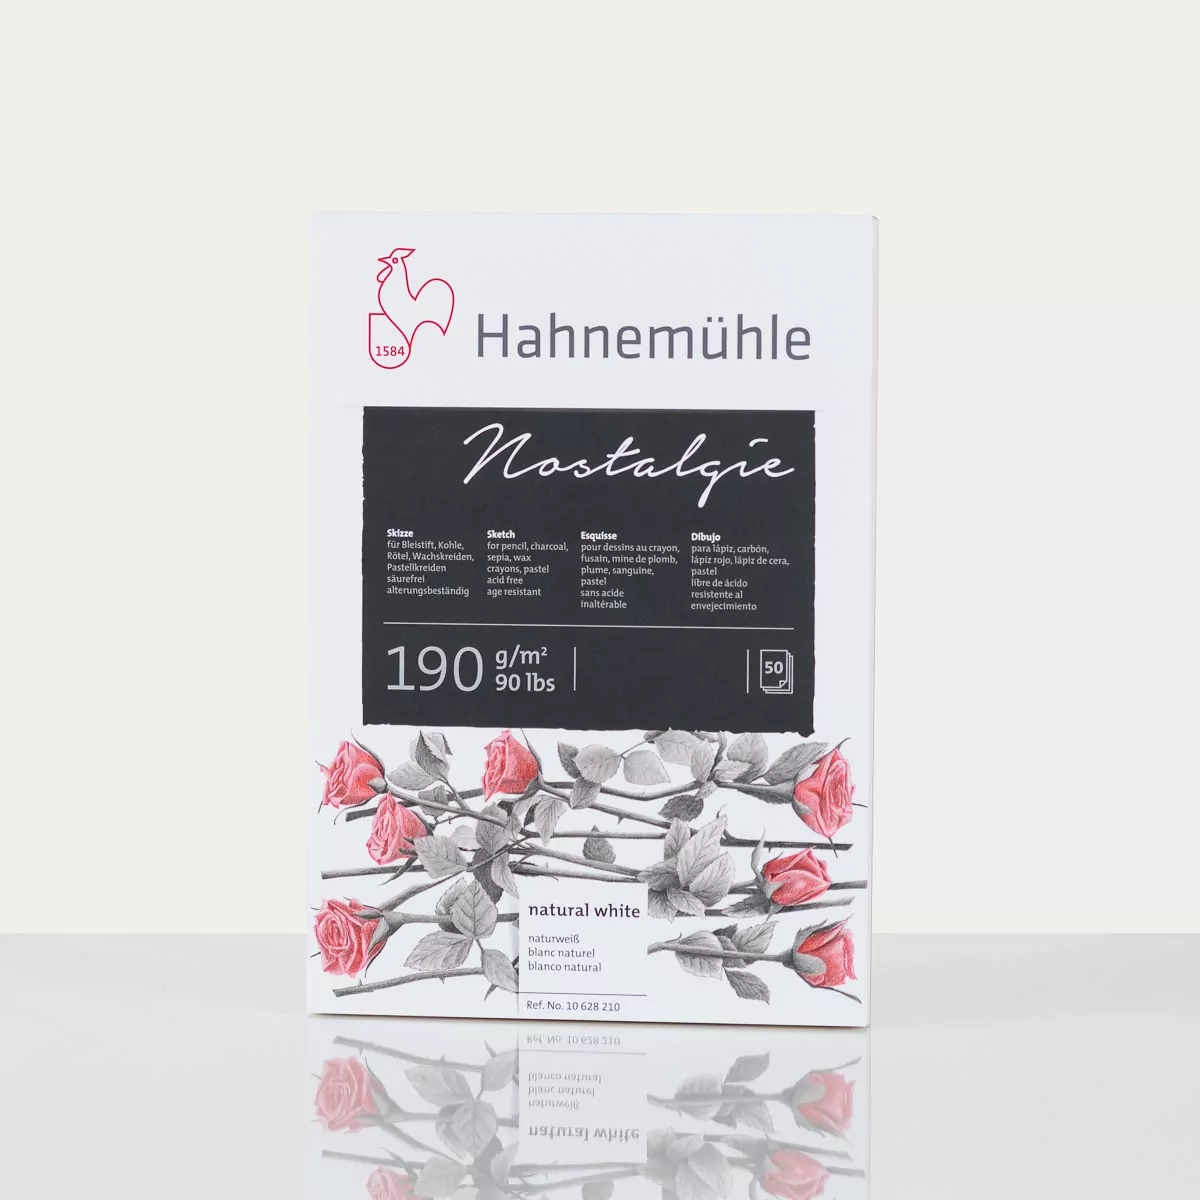 Traditional Hahnemuhle SketchPad “Nostalgie” 190gsm DIN A2  (50 Sheets)